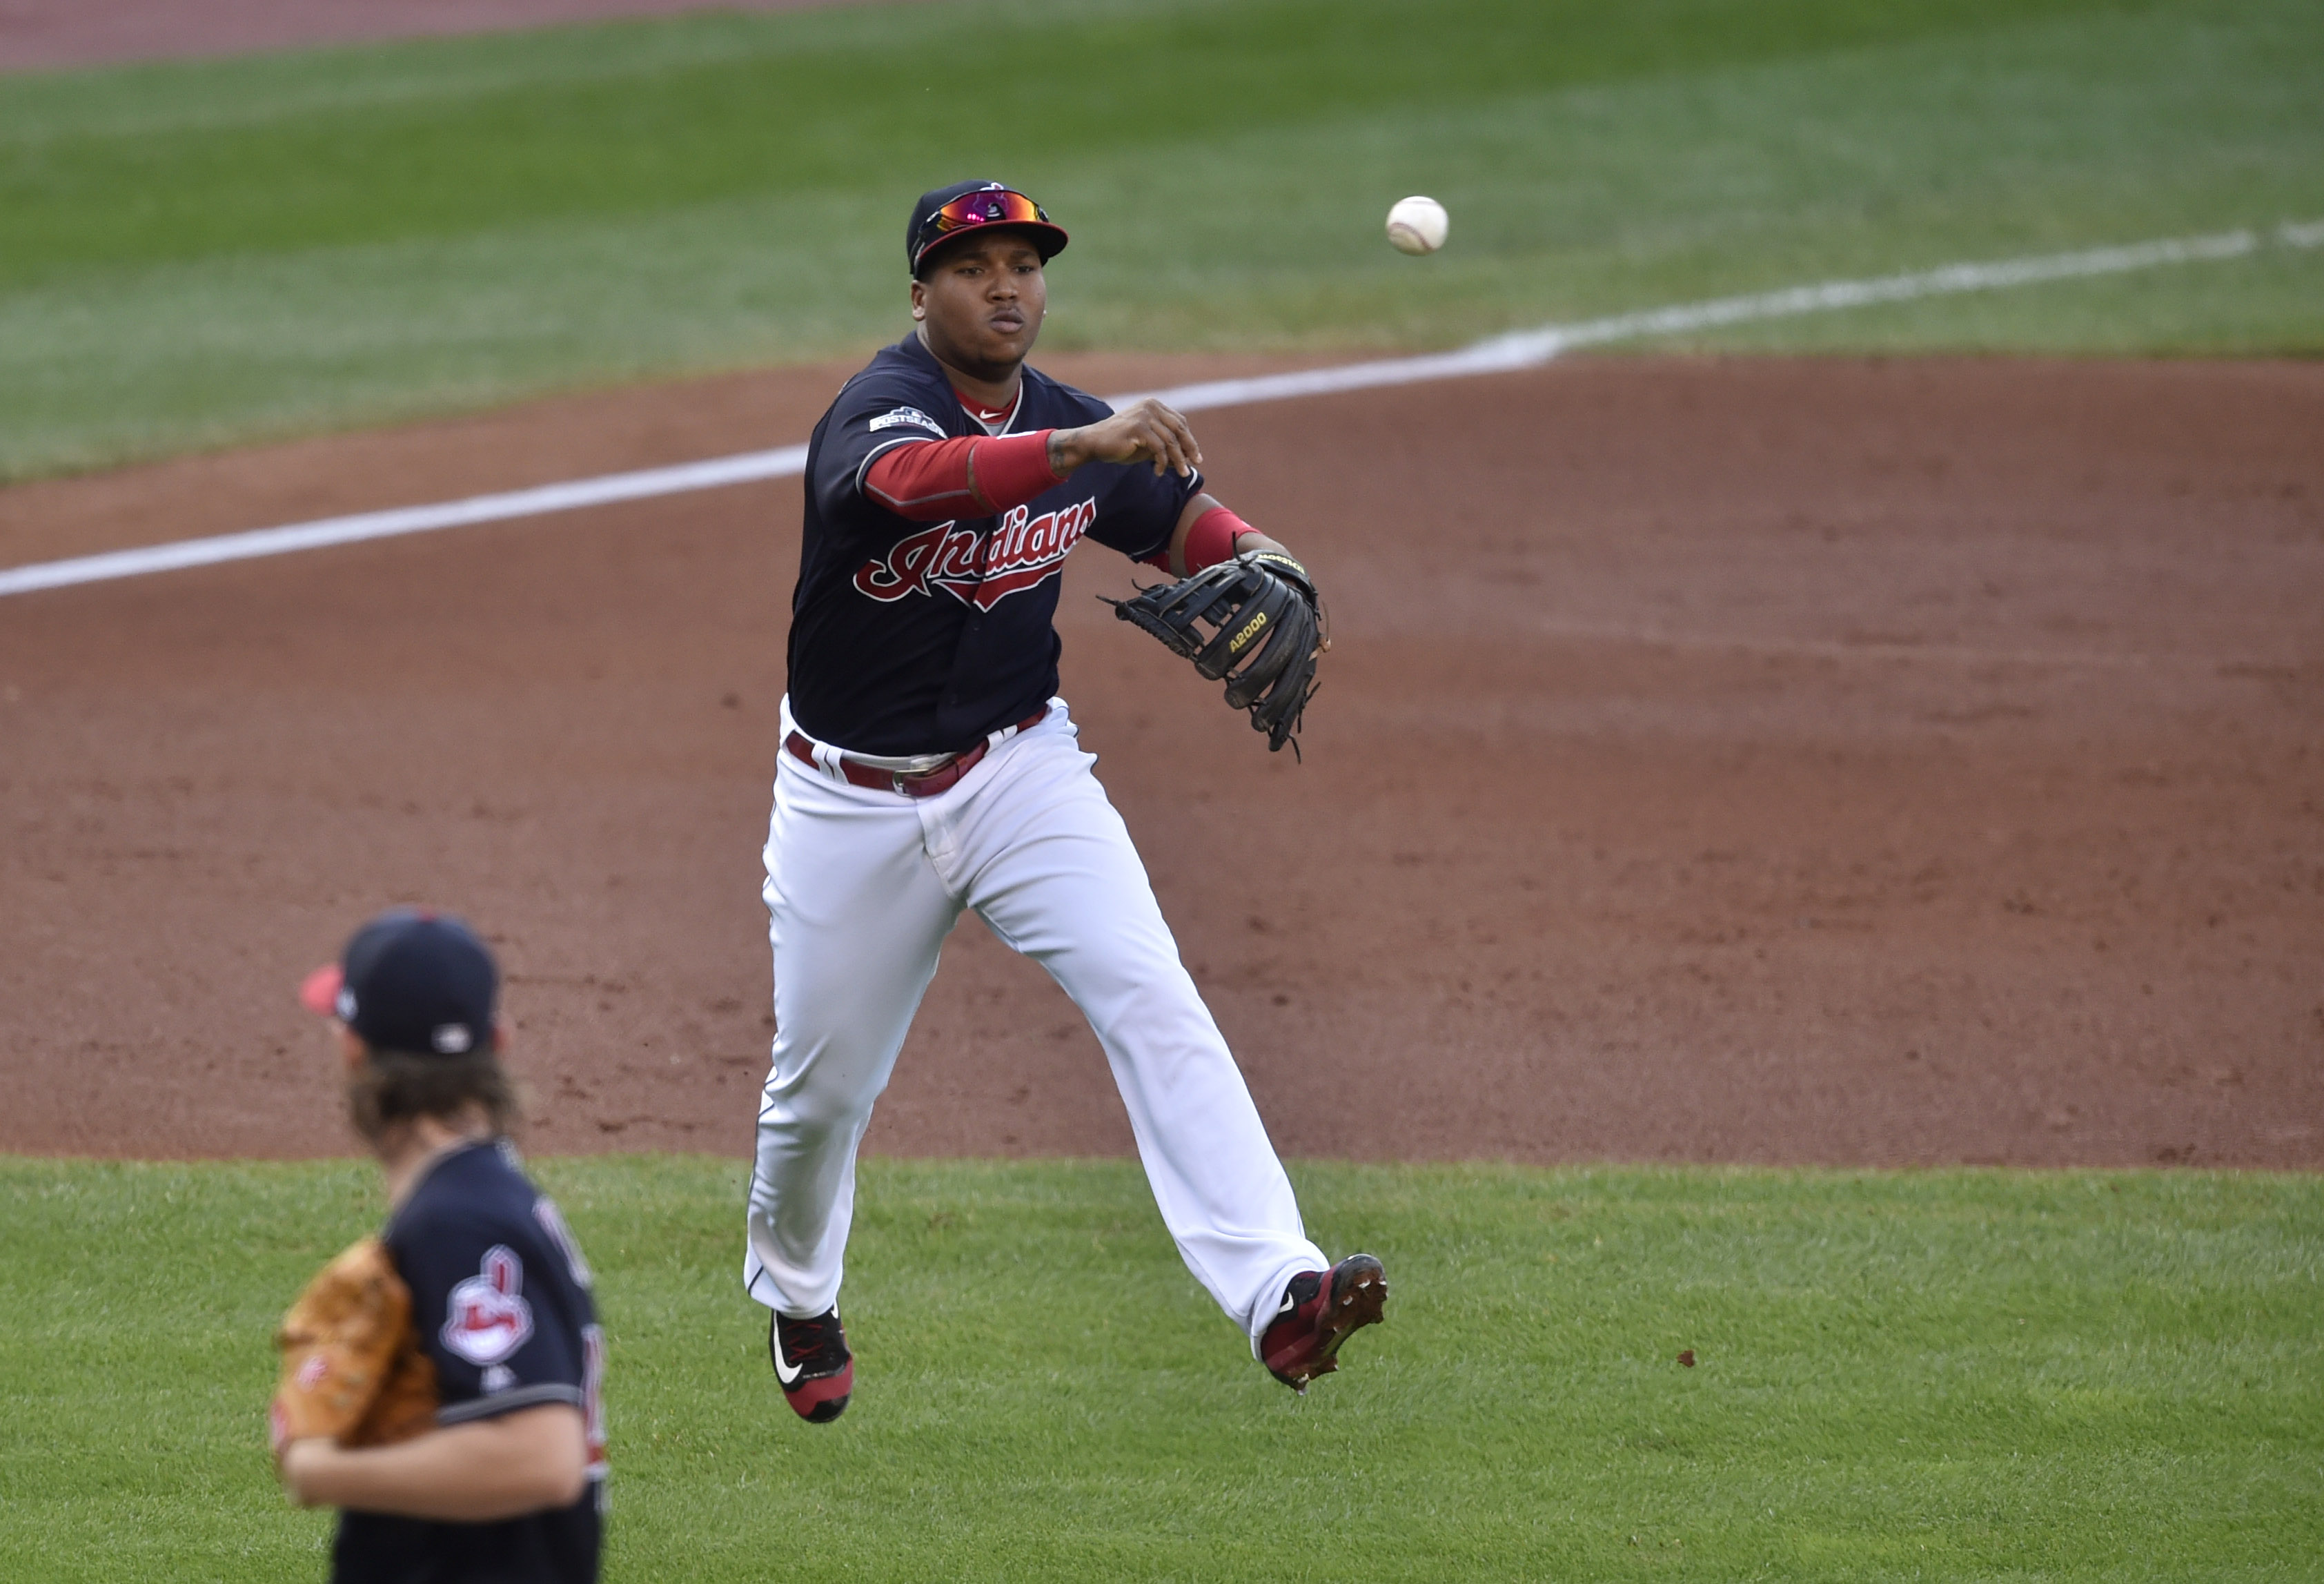 MLB suspends Braves reliever Jose Ramirez for throwing at batter